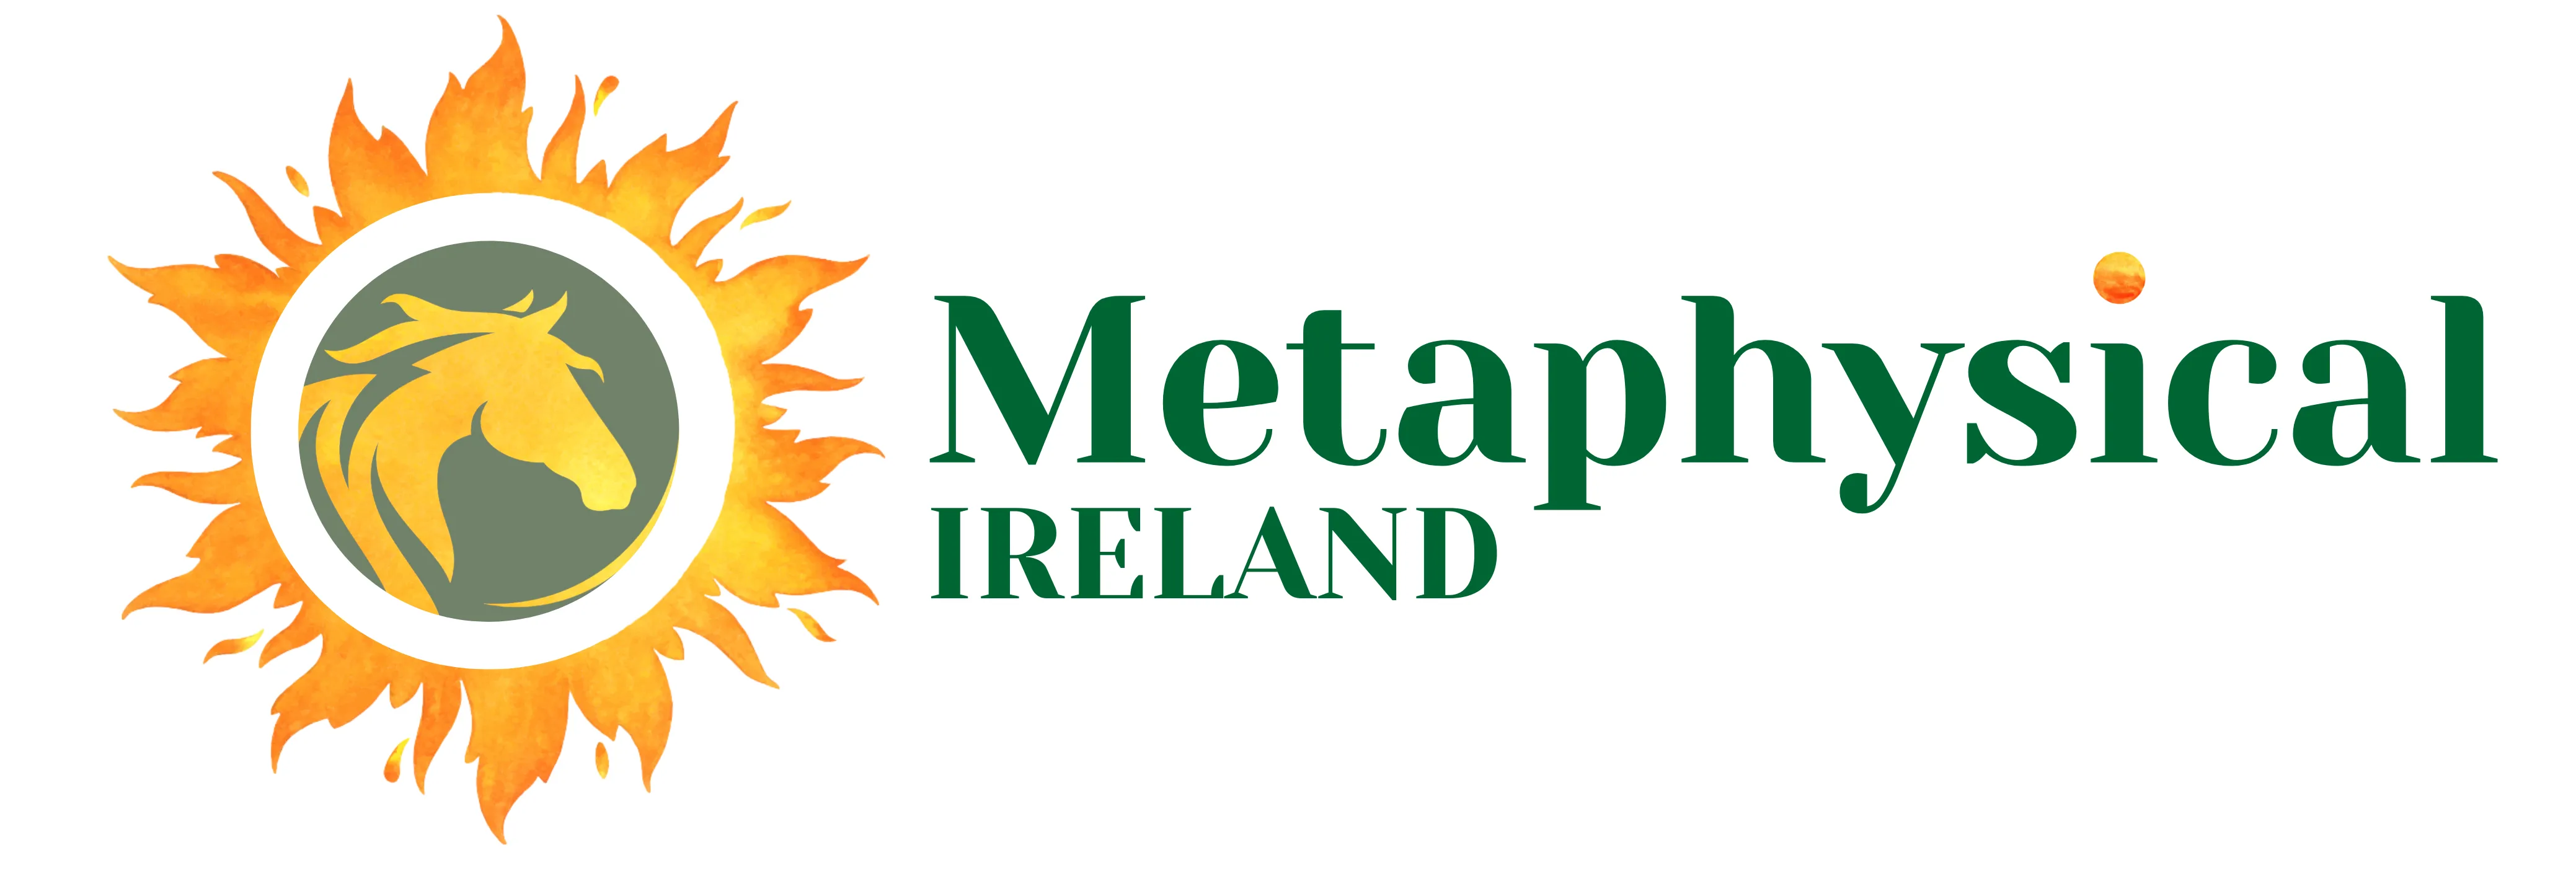 Metaphysical Ireland Intuitive Development Workshop 6 sessions Monday & Wednesday evenings on Zoom